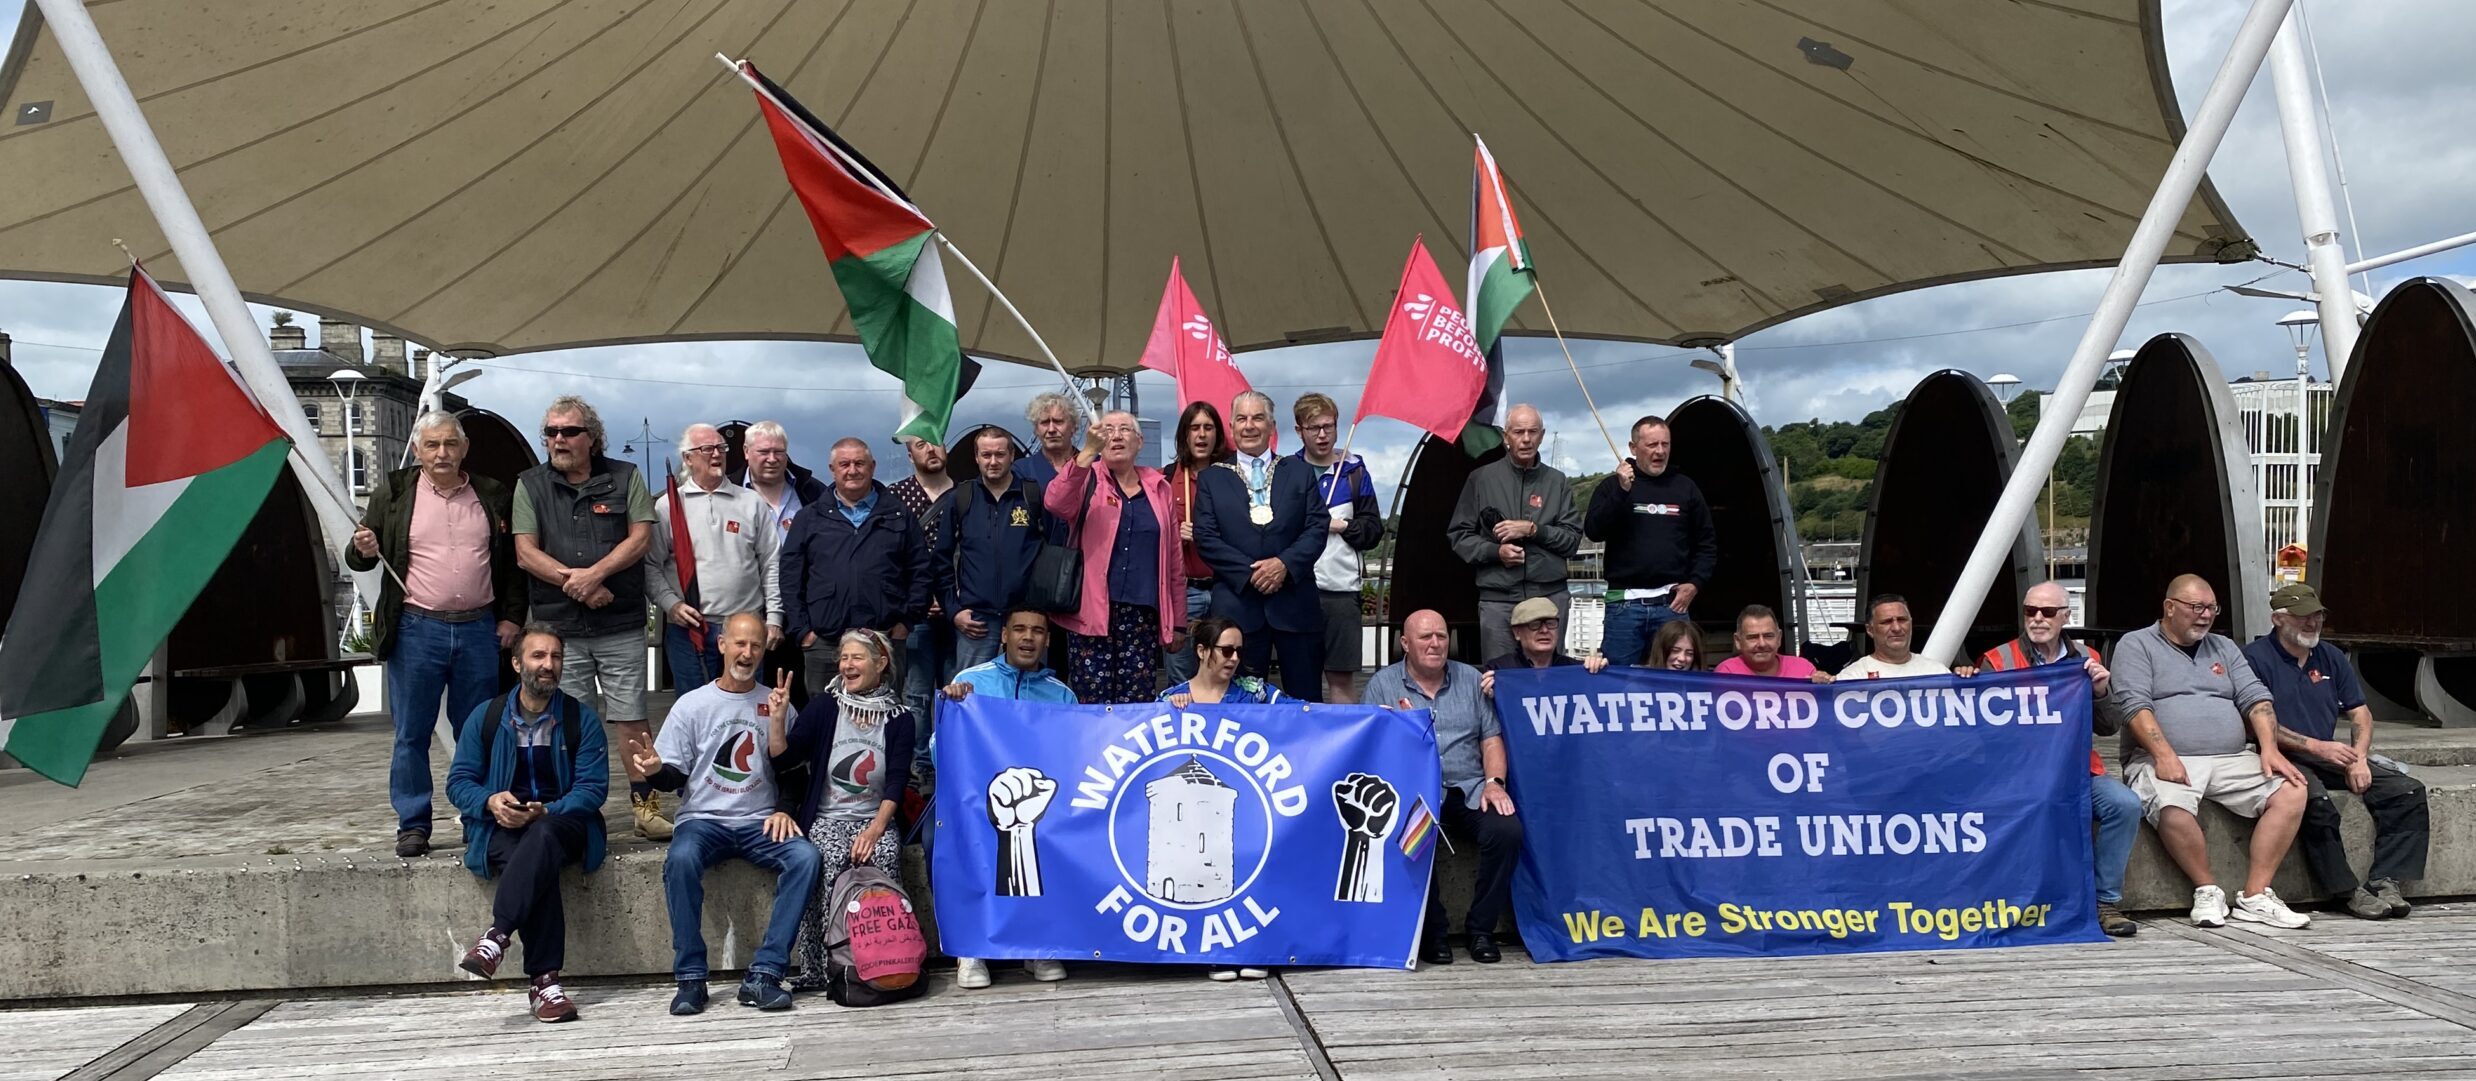 Waterford Council of Trade Unions